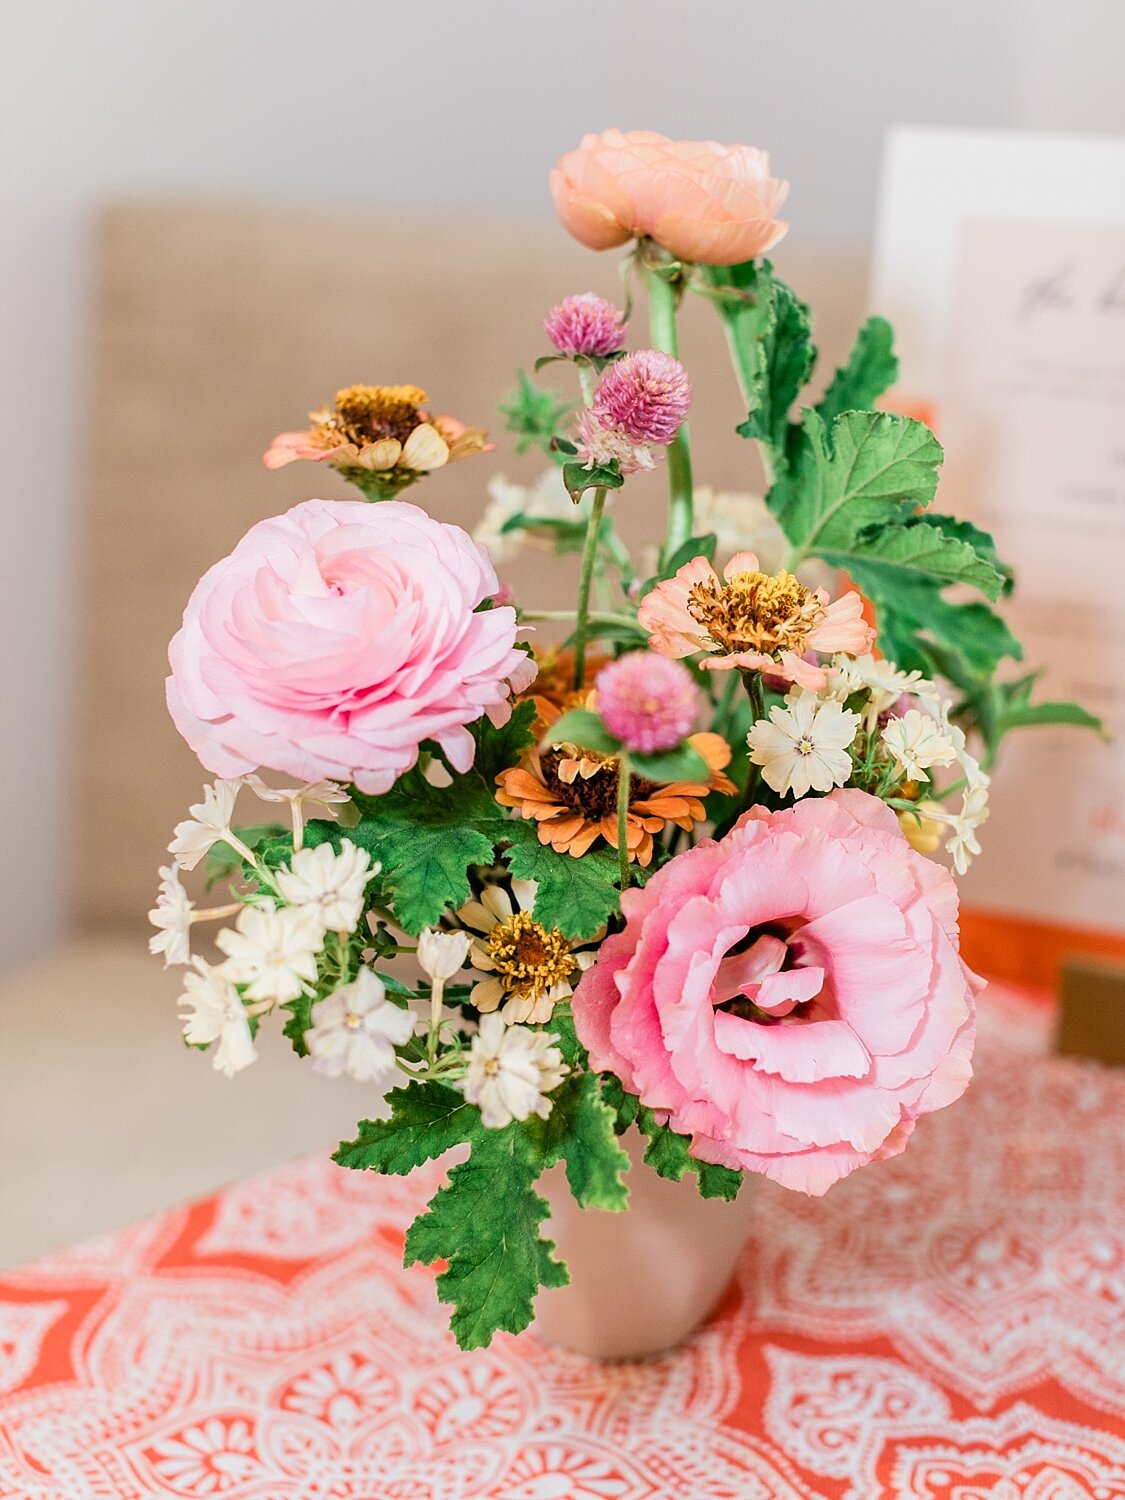 The Knot event with Rachel Lindsay decoration details